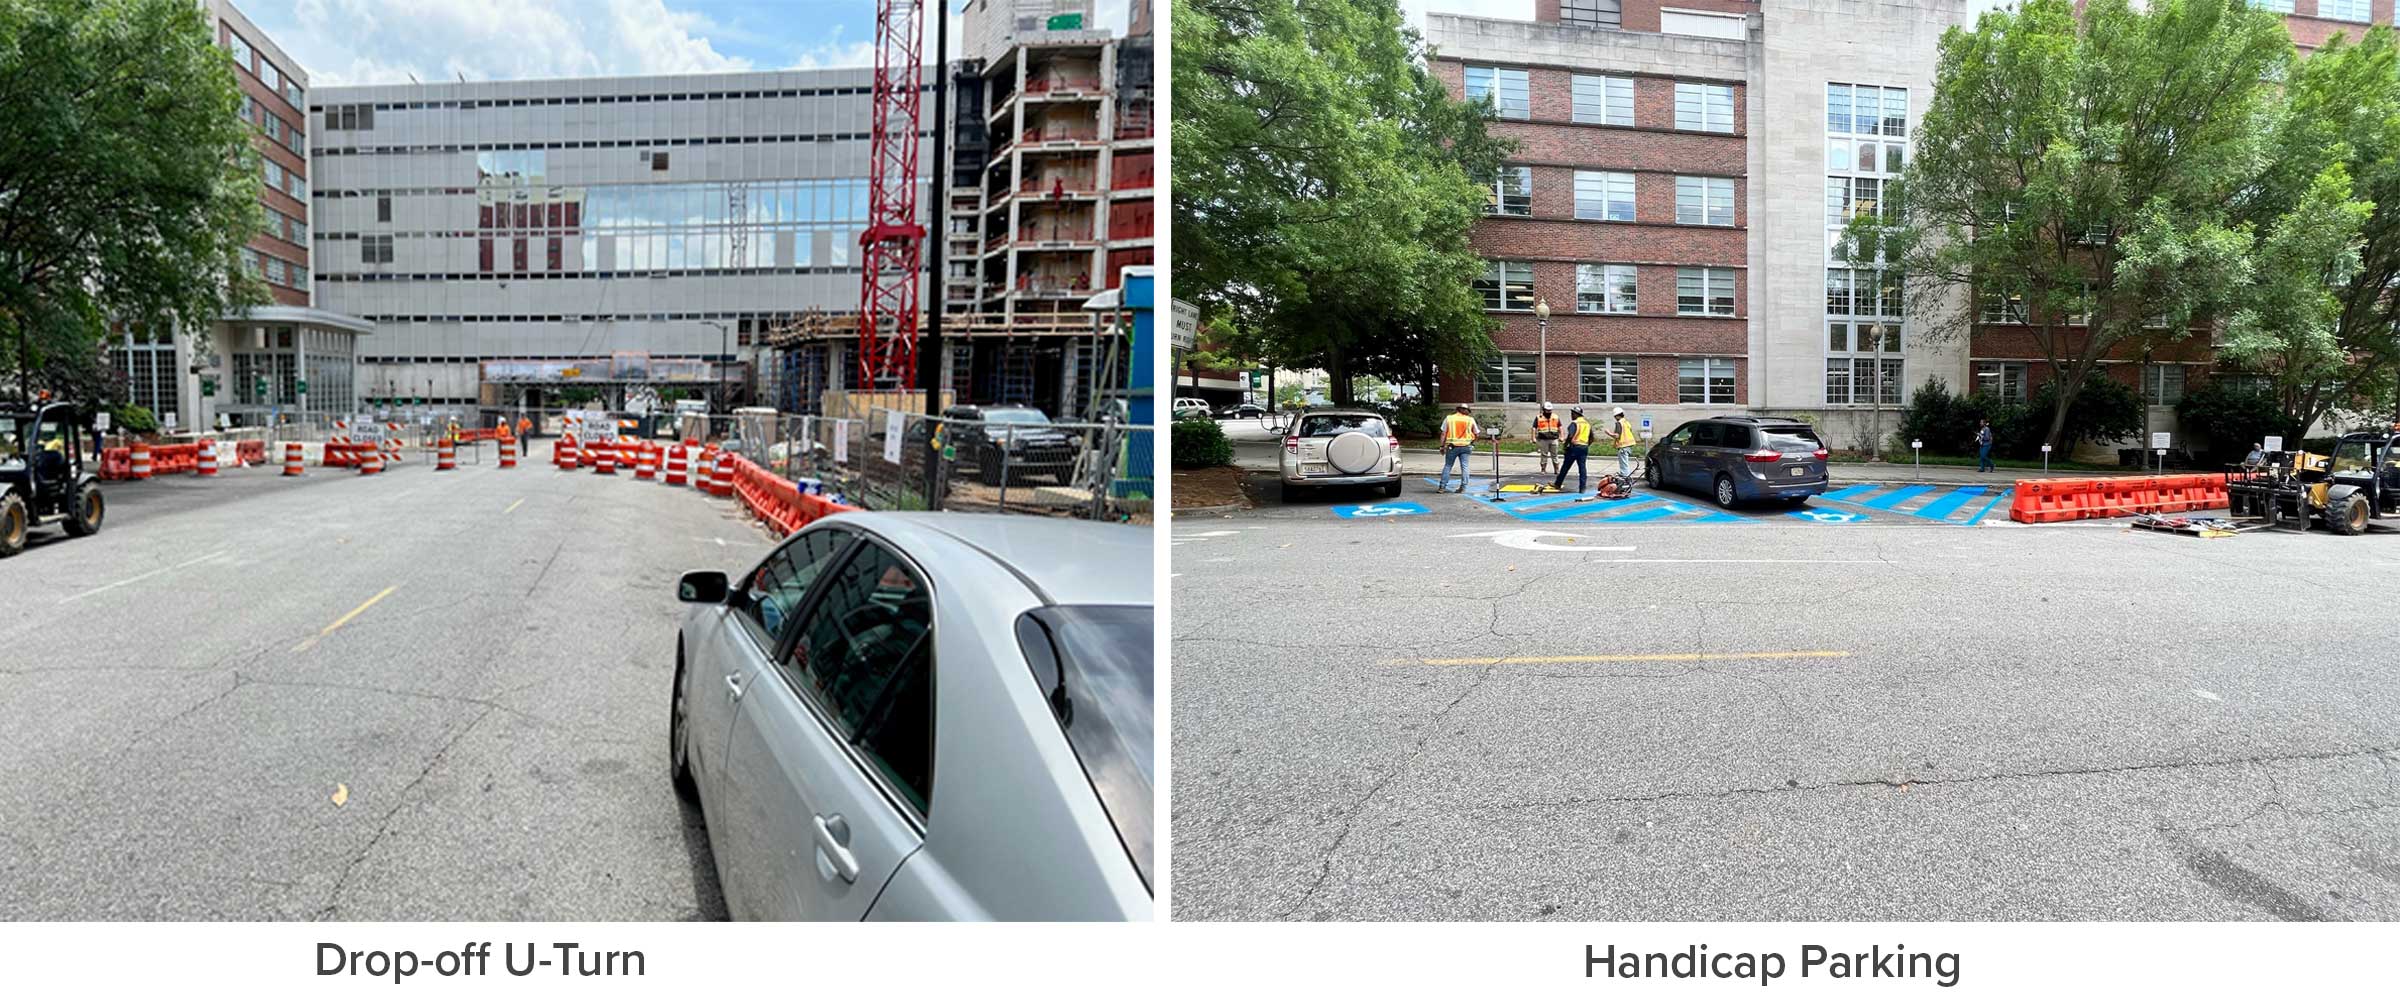 Left image shows blocked off street where you can drop off patiens and make a u-turn; right image shows limited handicapped parking directly outside building.